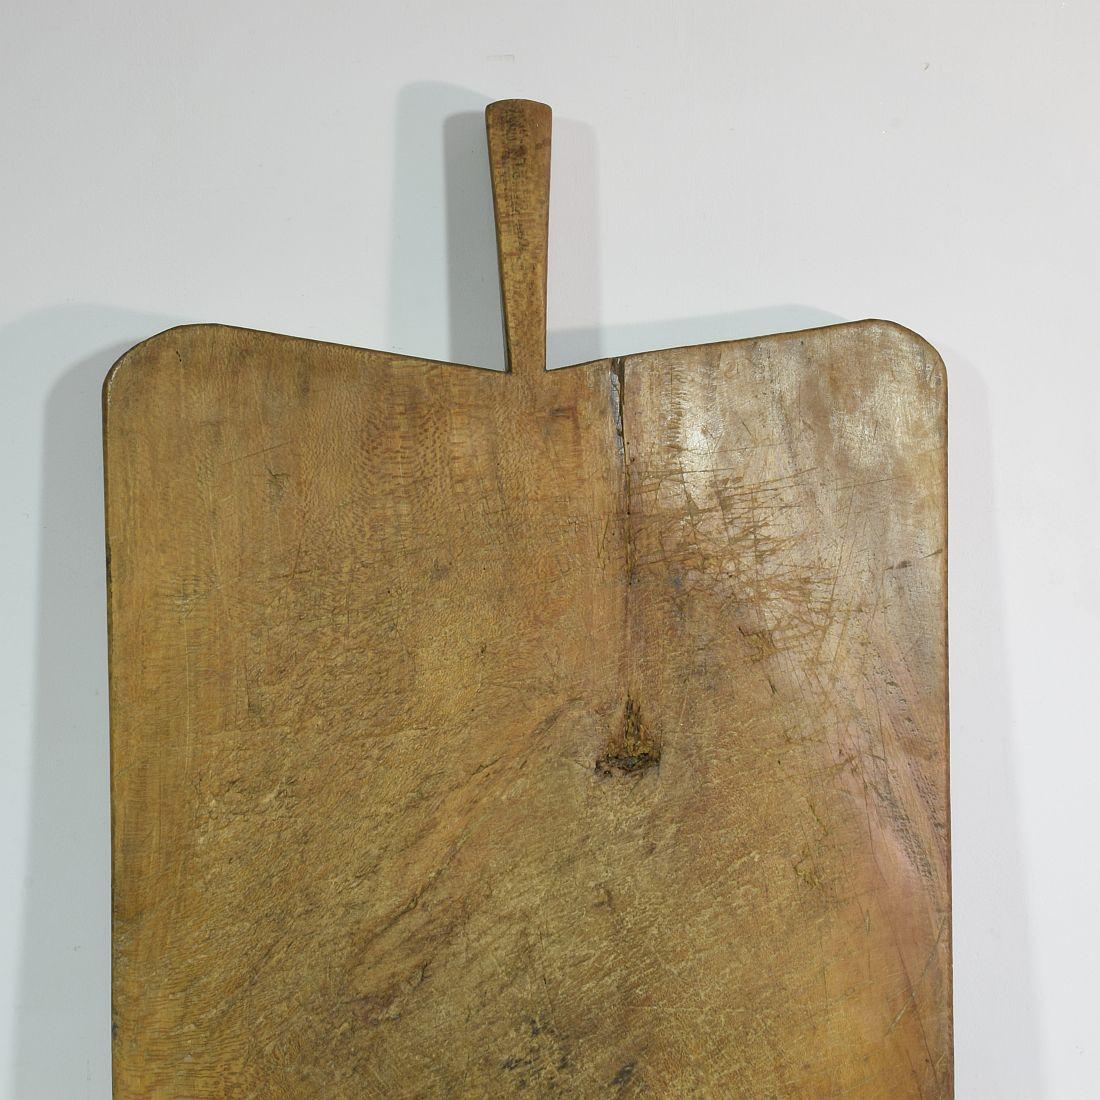 Giant 19th Century, French Wooden Chopping or Cutting Board 9